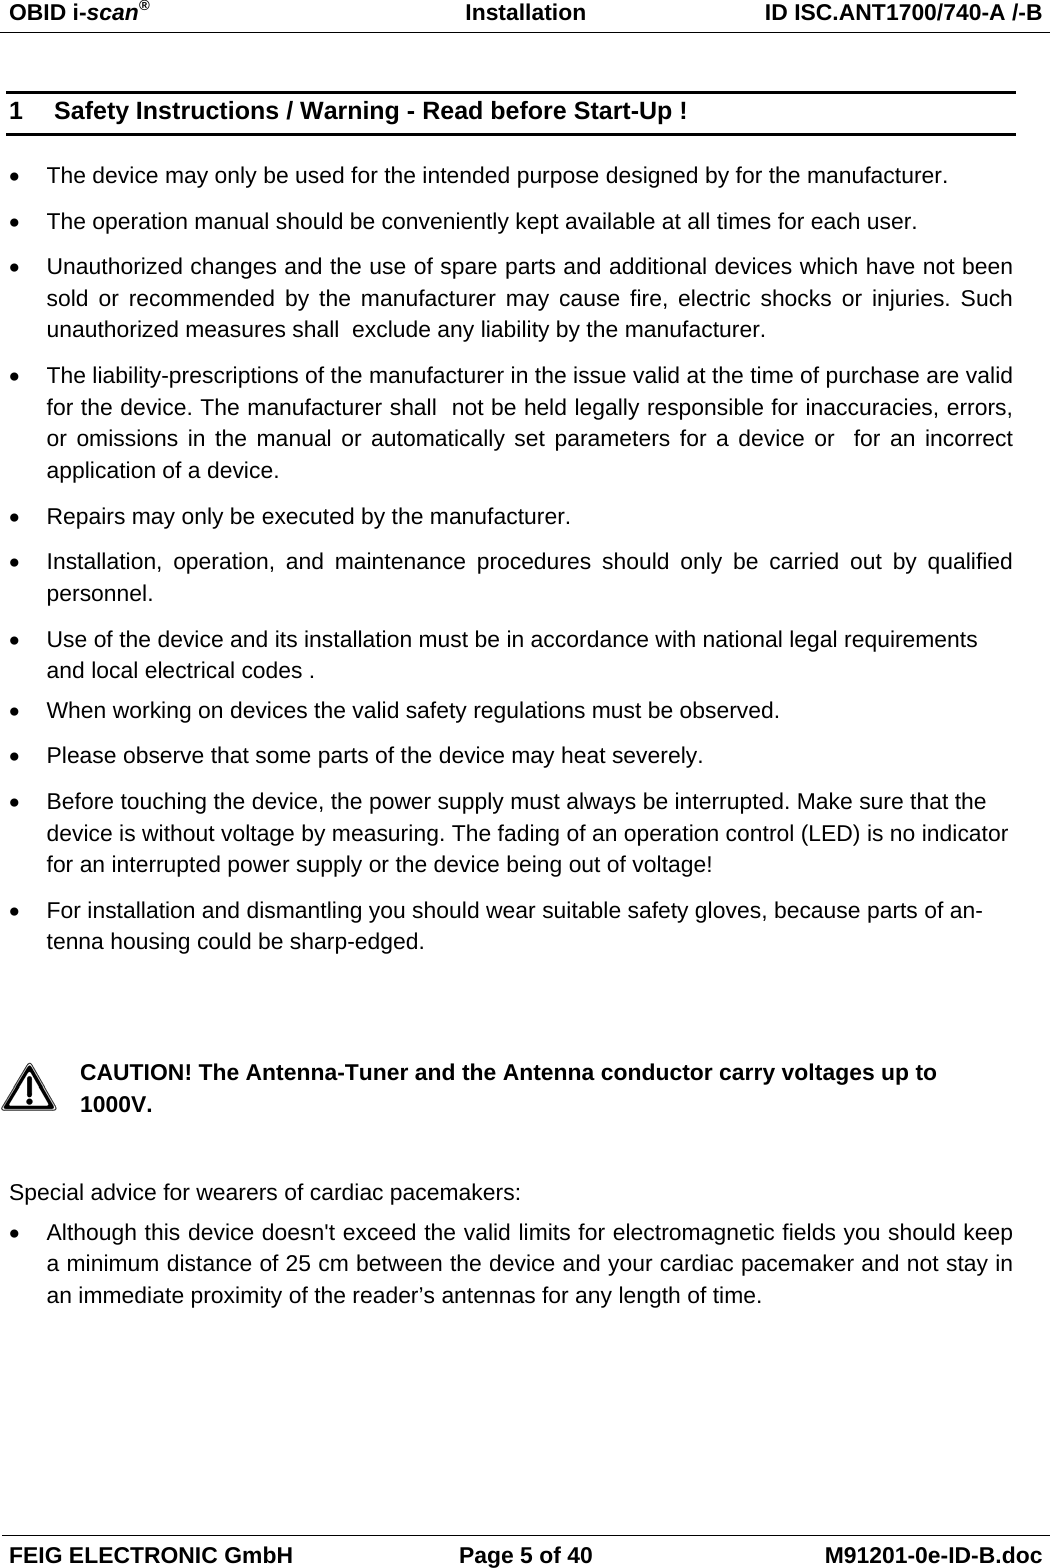 OBID i-scan®   Installation  ID ISC.ANT1700/740-A /-B FEIG ELECTRONIC GmbH  Page 5 of 40  M91201-0e-ID-B.doc 1  Safety Instructions / Warning - Read before Start-Up ! •  The device may only be used for the intended purpose designed by for the manufacturer. •  The operation manual should be conveniently kept available at all times for each user. •  Unauthorized changes and the use of spare parts and additional devices which have not been sold or recommended by the manufacturer may cause fire, electric shocks or injuries. Such unauthorized measures shall  exclude any liability by the manufacturer. •  The liability-prescriptions of the manufacturer in the issue valid at the time of purchase are valid for the device. The manufacturer shall  not be held legally responsible for inaccuracies, errors, or omissions in the manual or automatically set parameters for a device or  for an incorrect application of a device. •  Repairs may only be executed by the manufacturer. •  Installation, operation, and maintenance procedures should only be carried out by qualified personnel. •  Use of the device and its installation must be in accordance with national legal requirements and local electrical codes . •  When working on devices the valid safety regulations must be observed. •  Please observe that some parts of the device may heat severely. •  Before touching the device, the power supply must always be interrupted. Make sure that the device is without voltage by measuring. The fading of an operation control (LED) is no indicator for an interrupted power supply or the device being out of voltage! •  For installation and dismantling you should wear suitable safety gloves, because parts of an-tenna housing could be sharp-edged.   CAUTION! The Antenna-Tuner and the Antenna conductor carry voltages up to 1000V.  Special advice for wearers of cardiac pacemakers: •  Although this device doesn&apos;t exceed the valid limits for electromagnetic fields you should keep a minimum distance of 25 cm between the device and your cardiac pacemaker and not stay in an immediate proximity of the reader’s antennas for any length of time.  